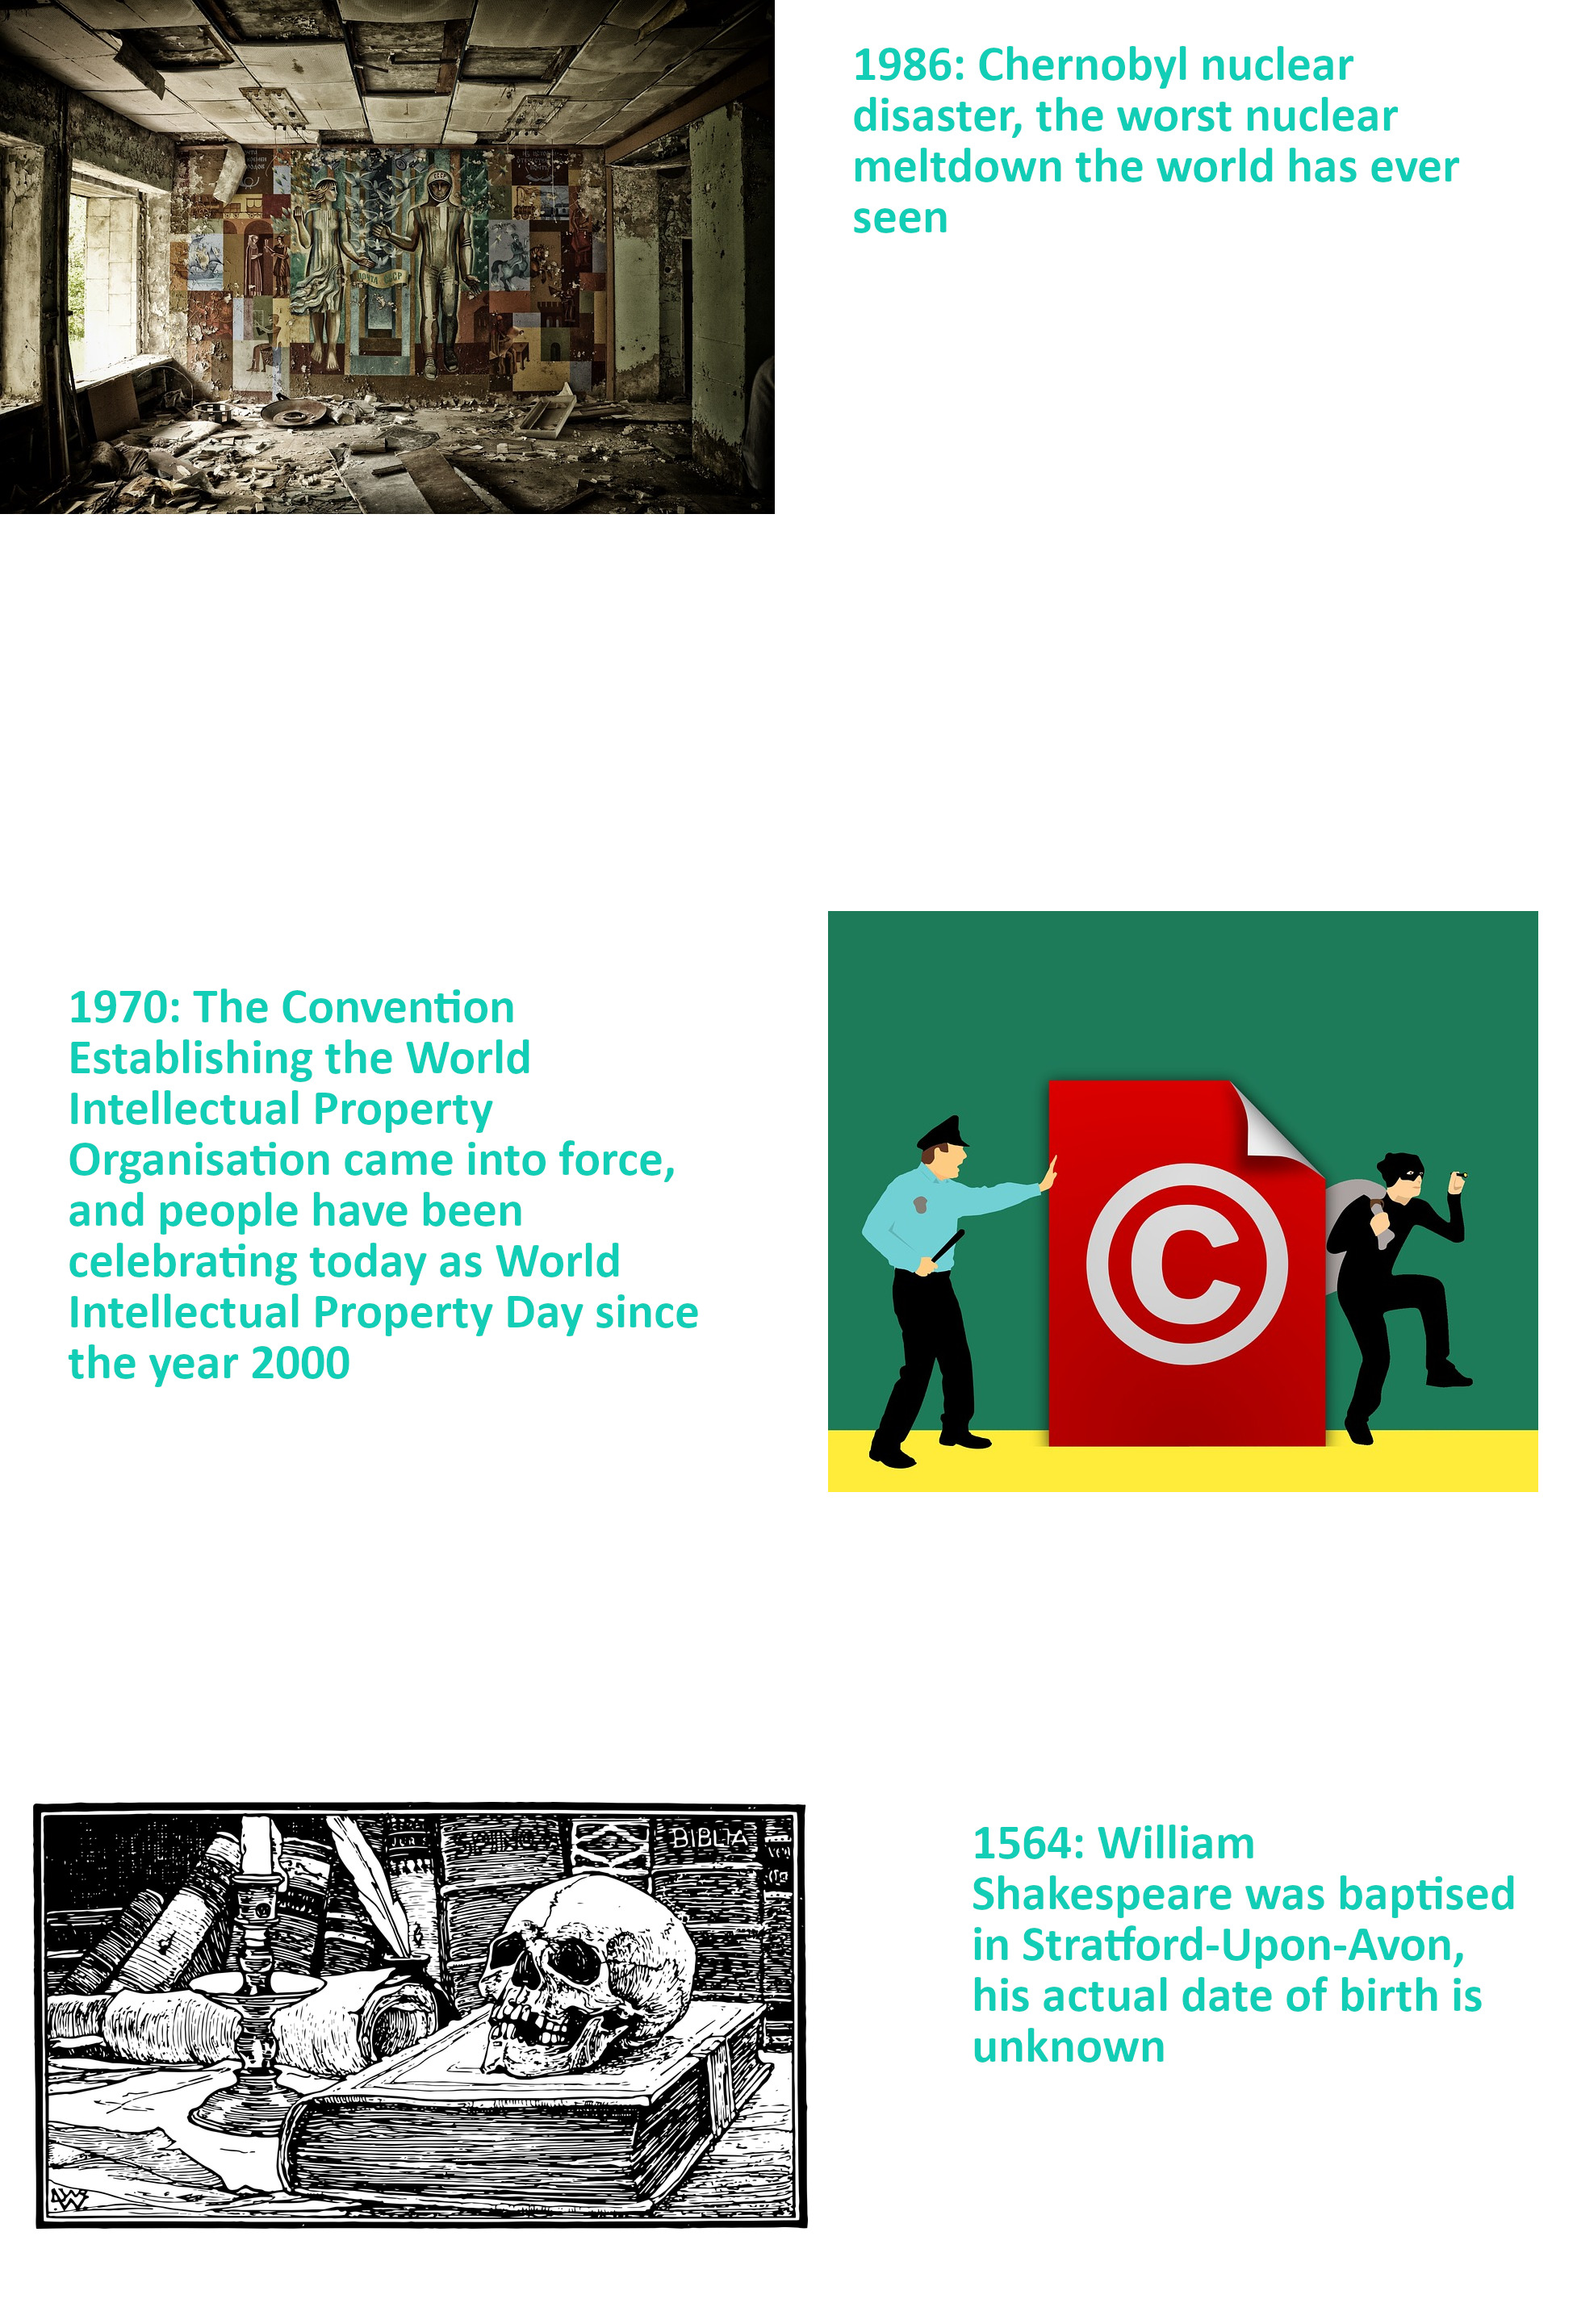 Pictures describing the anniversaries of the Chernobyl Disaster, World Intellectual Property Day and Shakespeare's baptism